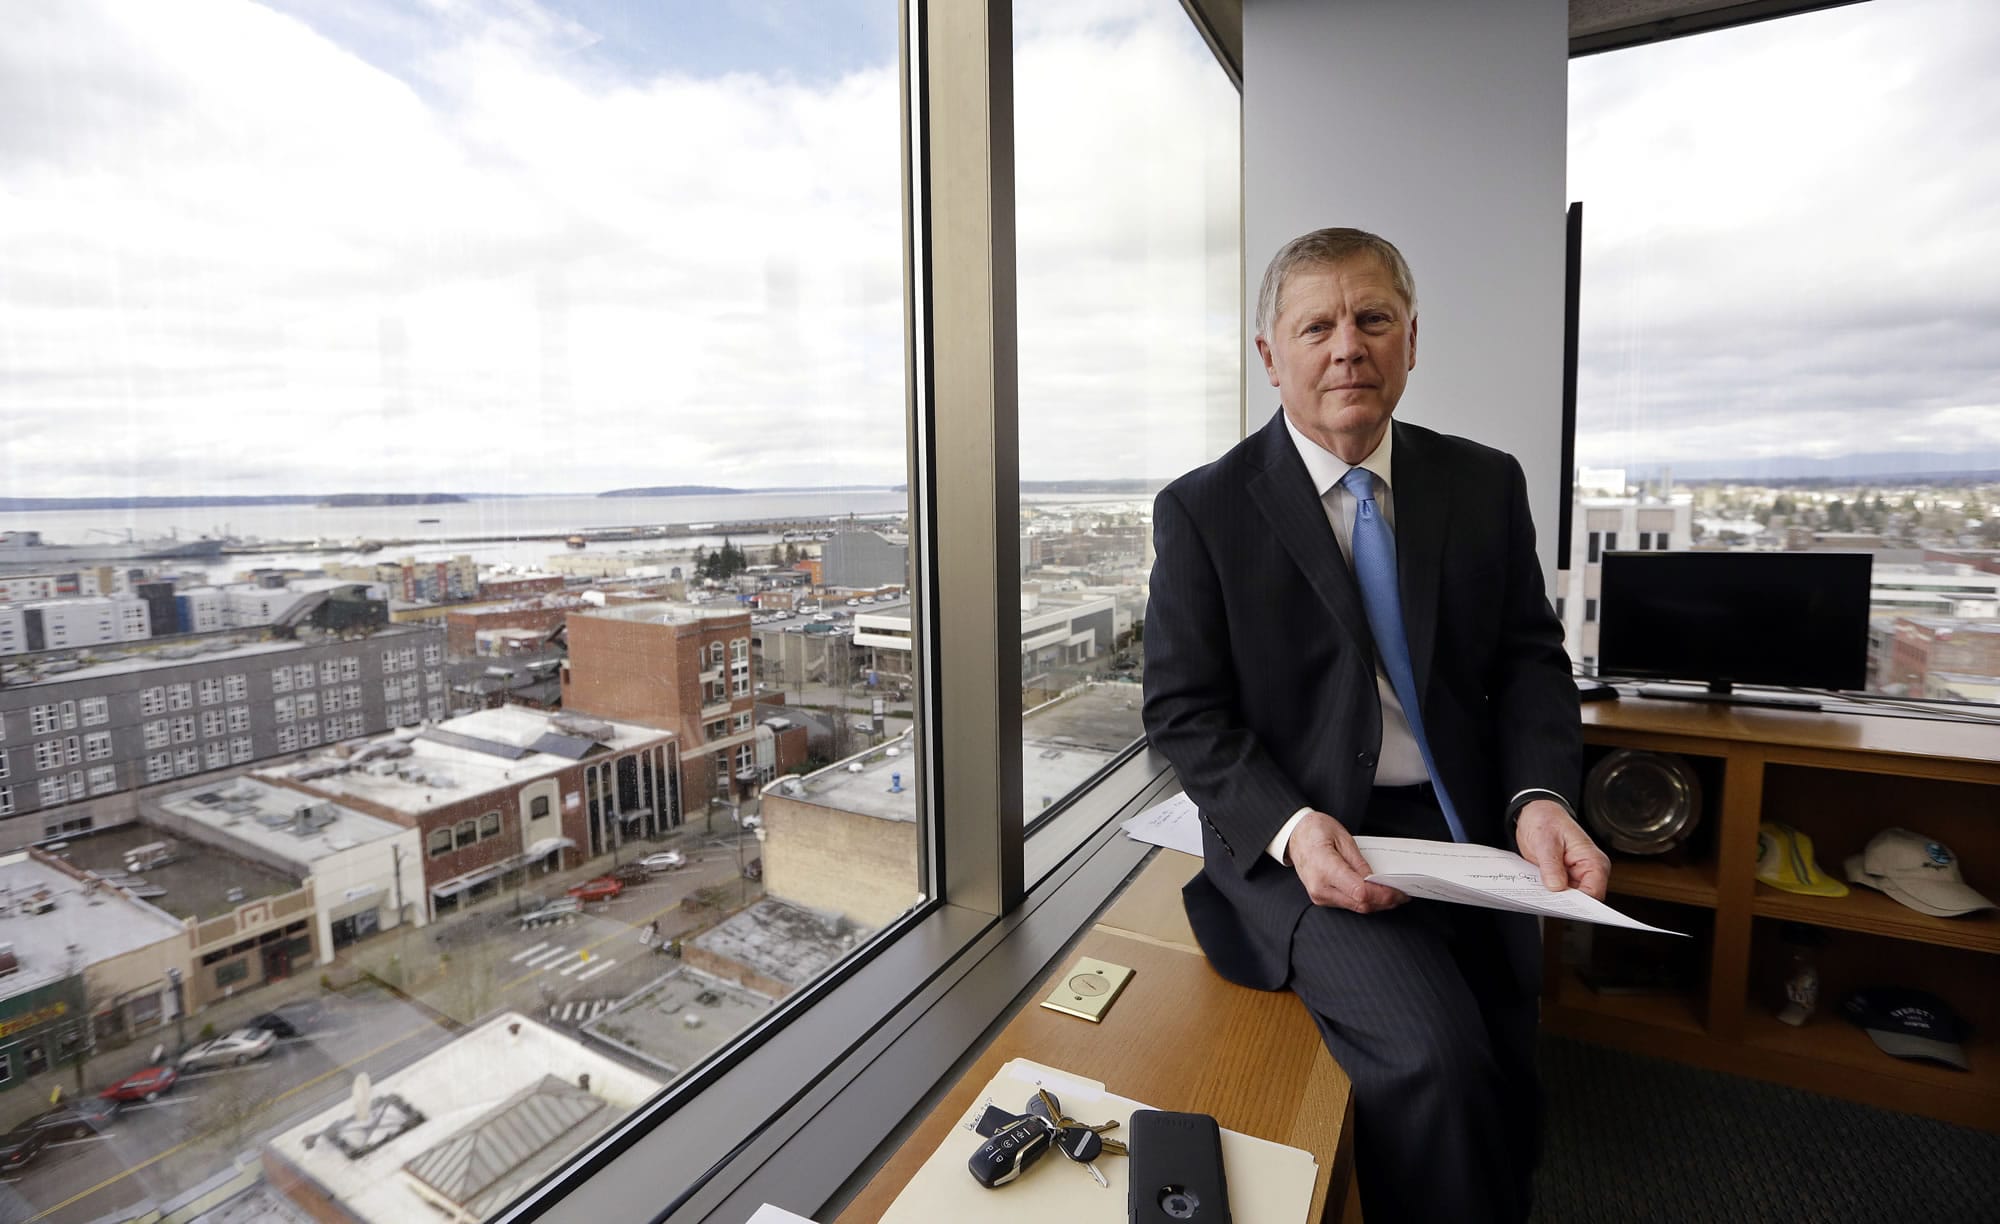 FILE--In this Feb. 16, 2017, file photo, Everett Mayor Ray Stephanson sits in his corner office overlooking downtown Everett, Wash. Stephanson is suing pharmaceutical giant Purdue Pharma, becoming the first city to try to hold the maker of OxyContin accountable for damages to his community. Connecticut-based Purdue Pharma argued in court documents filed Monday, March 20, 2017, there is no legal basis for such a lawsuit.